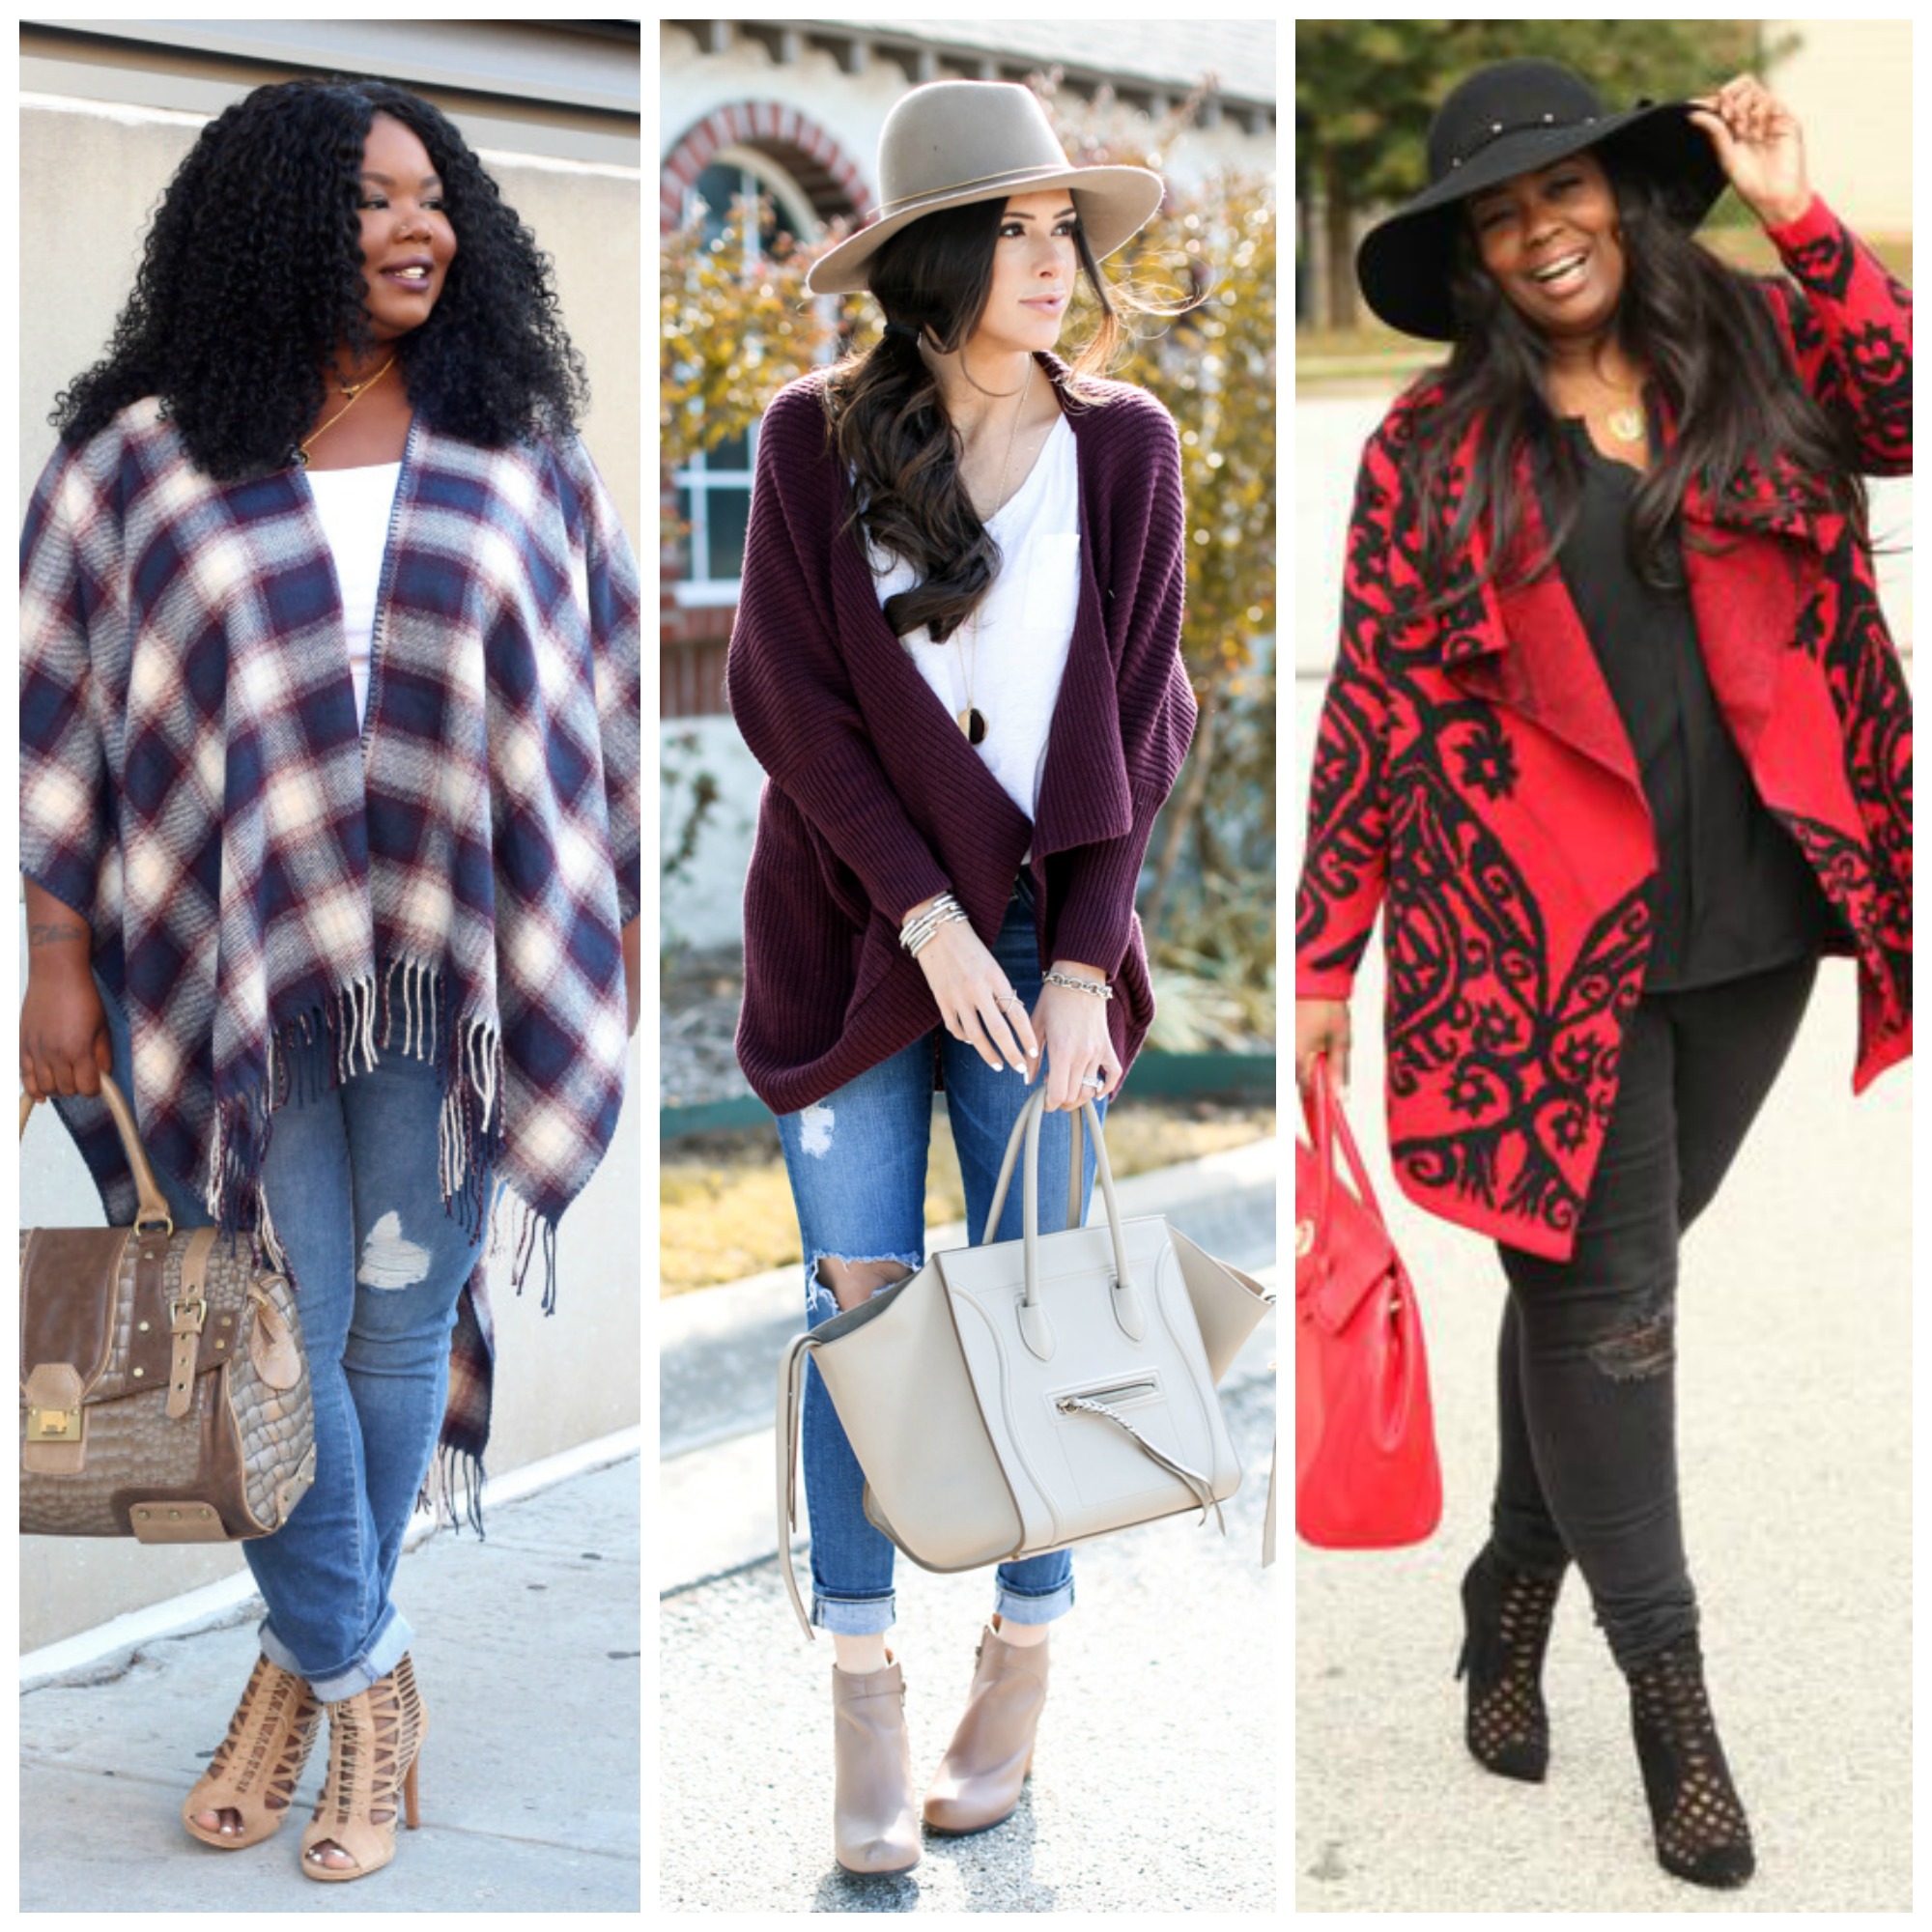 Style Trend: Fashion Bloggers Show Their Favorite Fall Looks